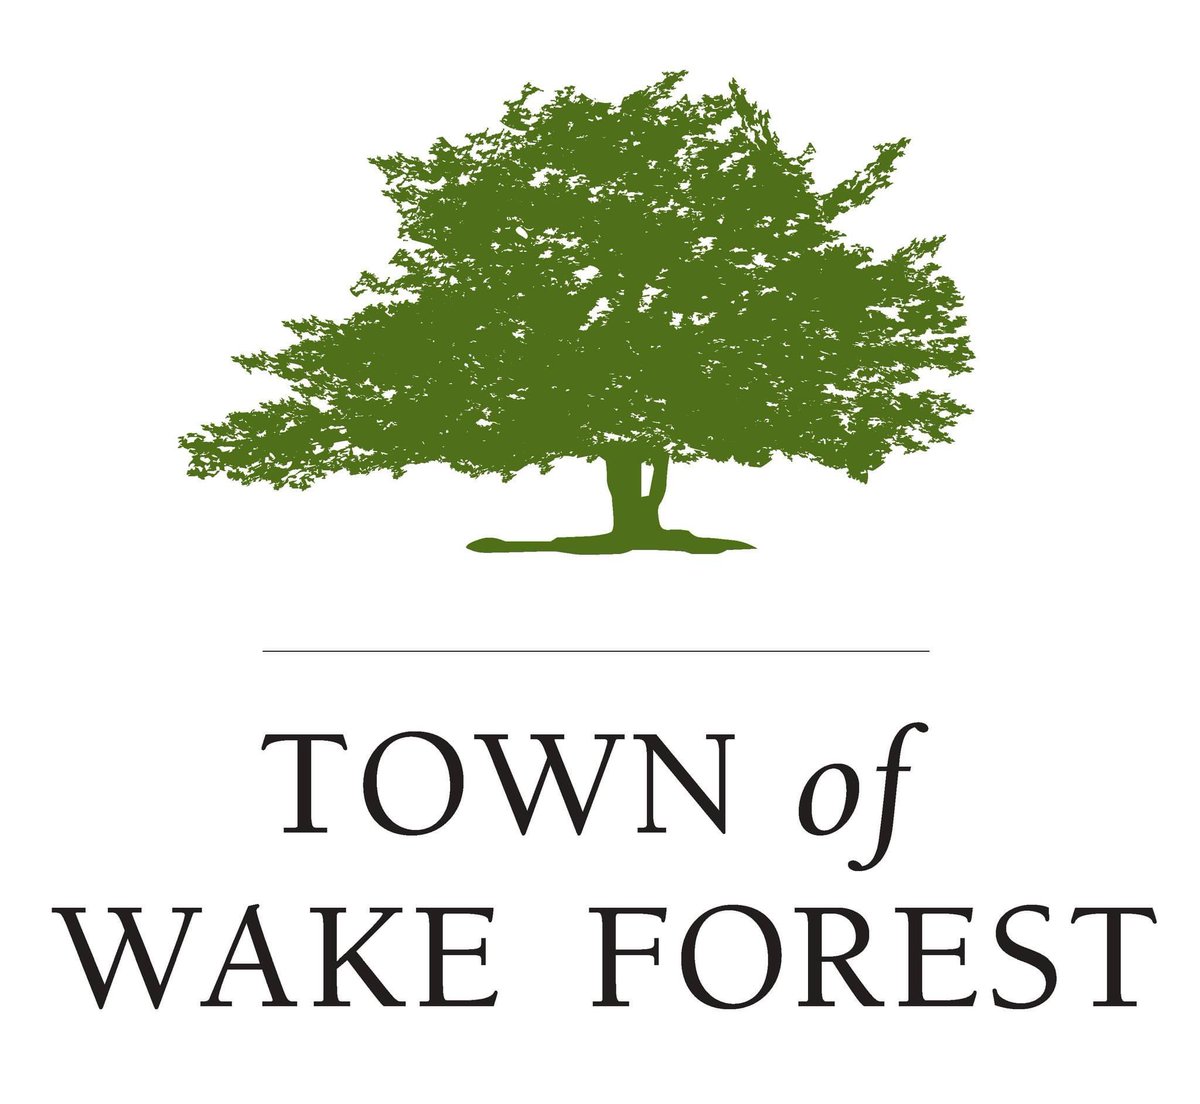 LAST DAY to apply for Historic Preservation Commission & Public Art Commission!

To apply, visit:  bit.ly/TOWFAdvBoardAp….

#TownofWakeForest #WakeForestNC #AdvisoryBoards #HistoricPreservationCommission #PublicArtCommission